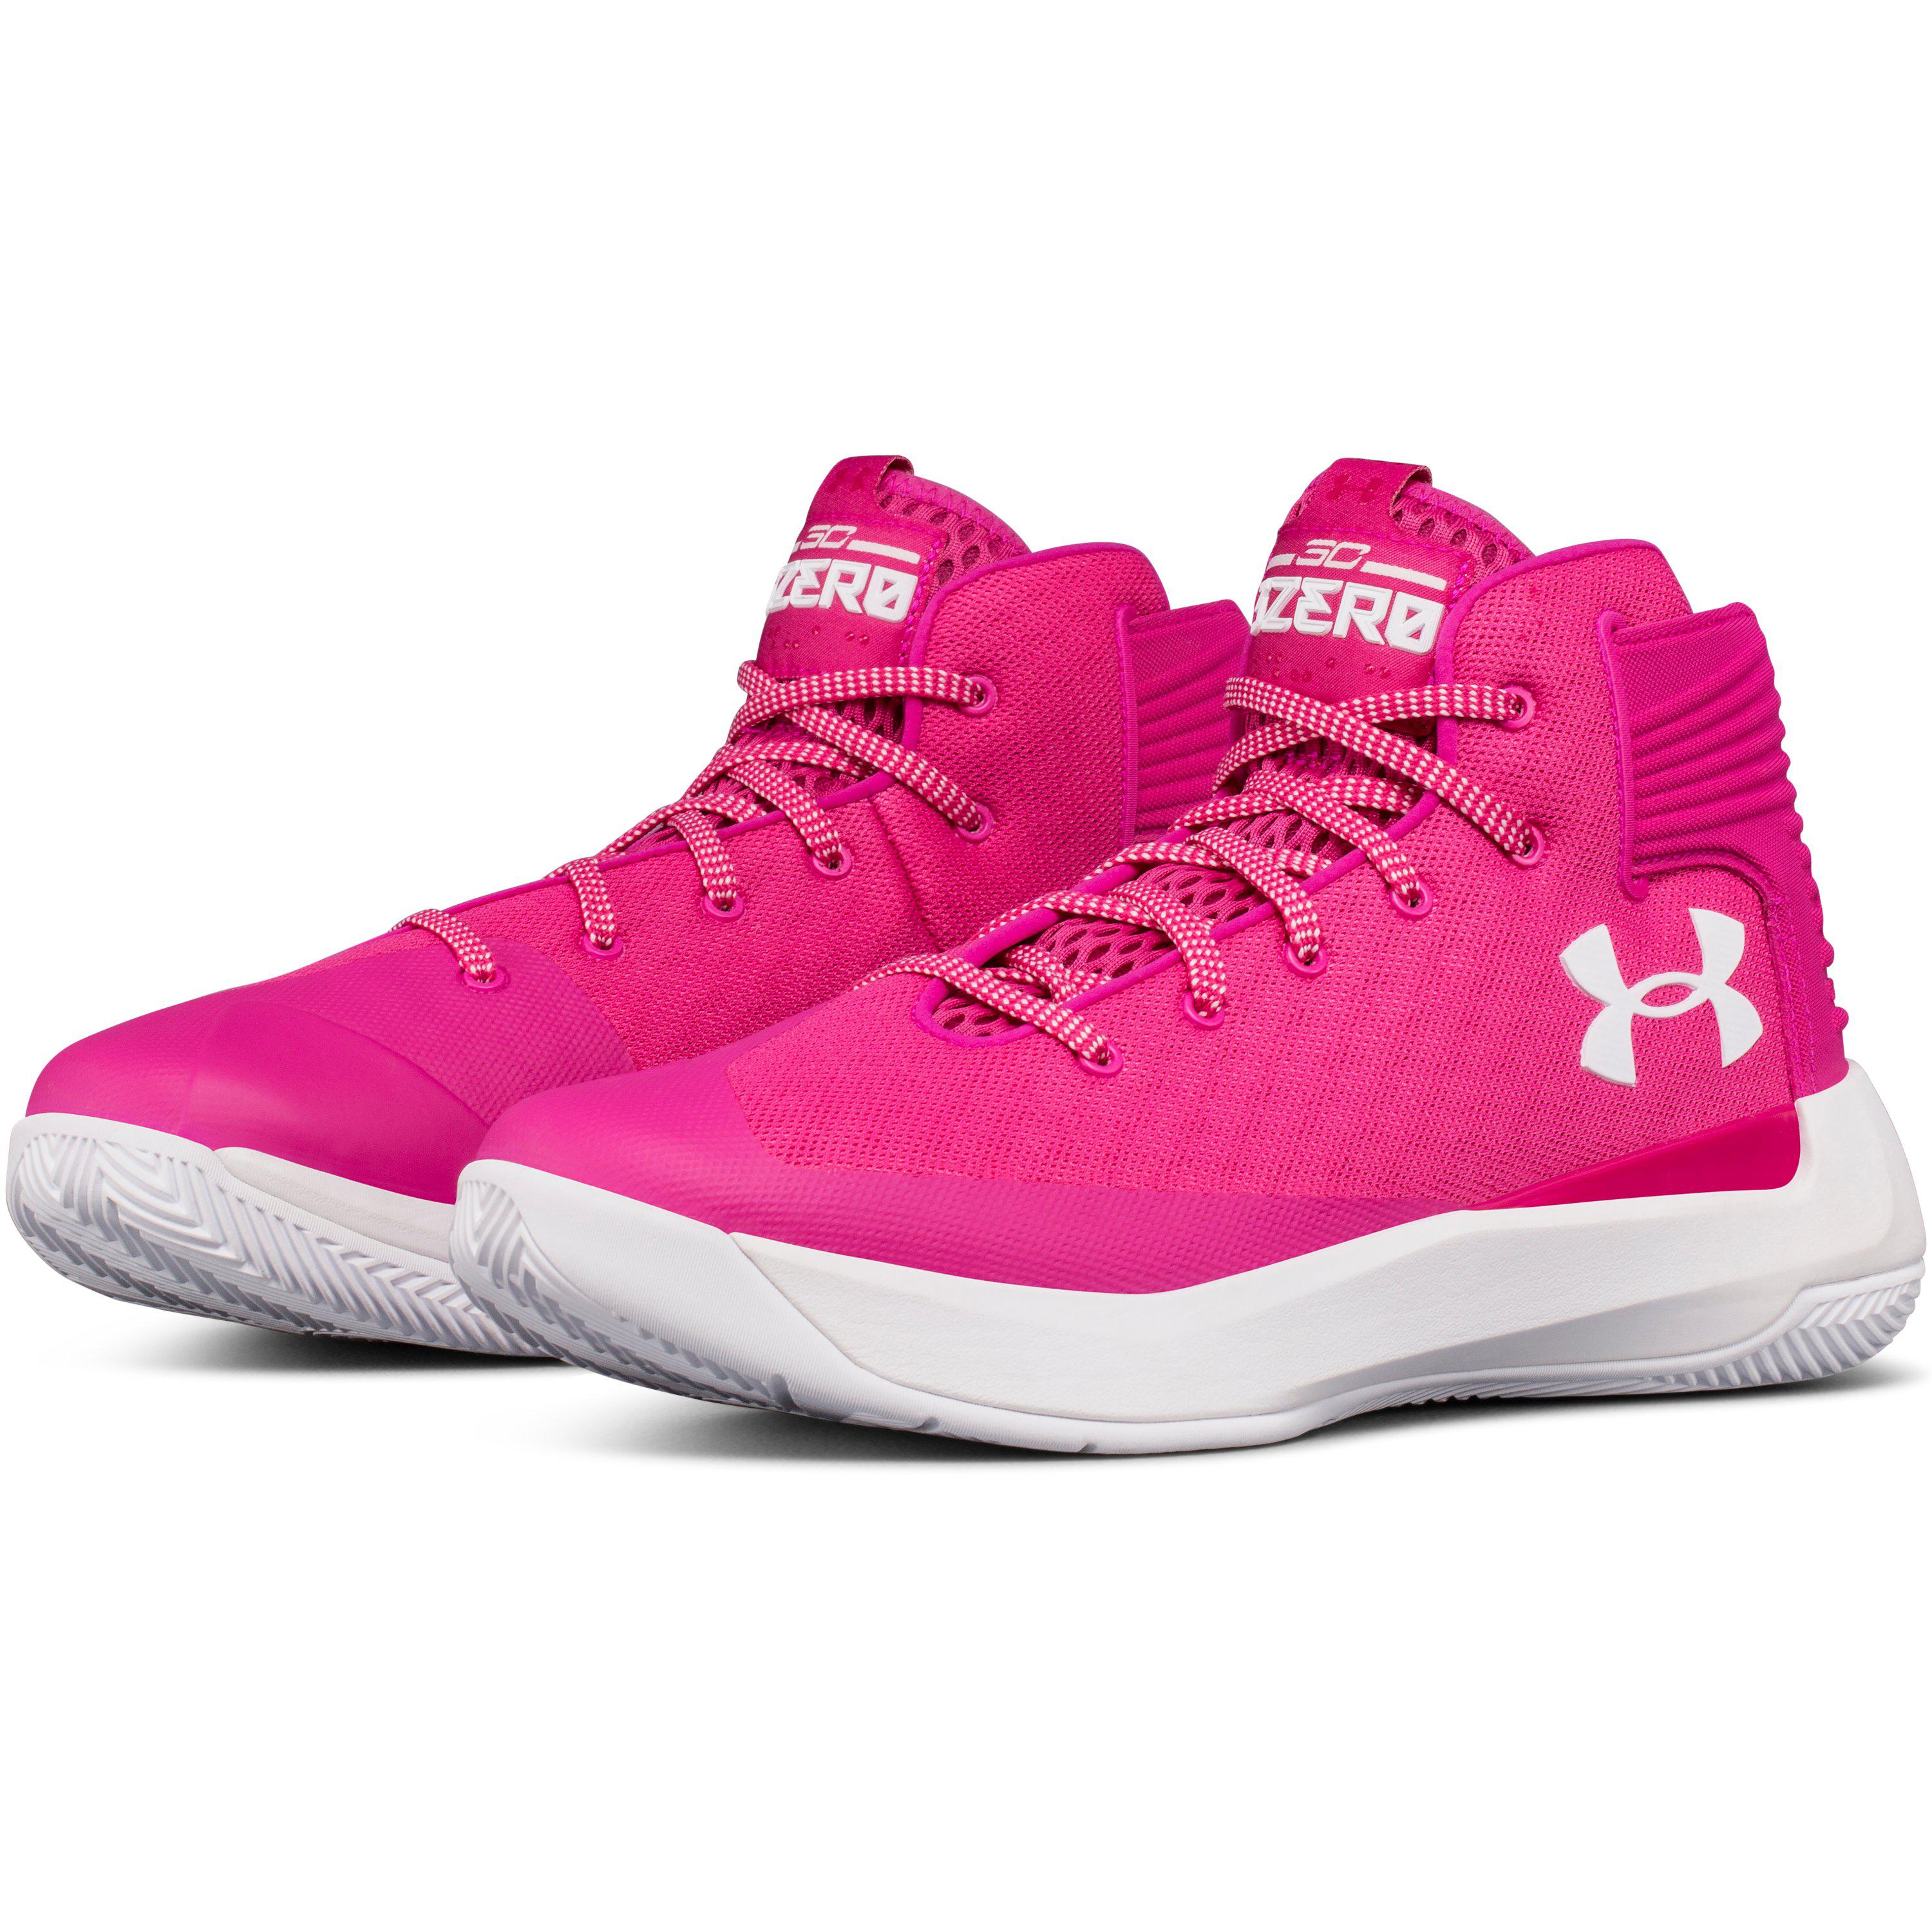 Under Armour Men's Ua Curry 3zer0 Basketball Shoes in Pink